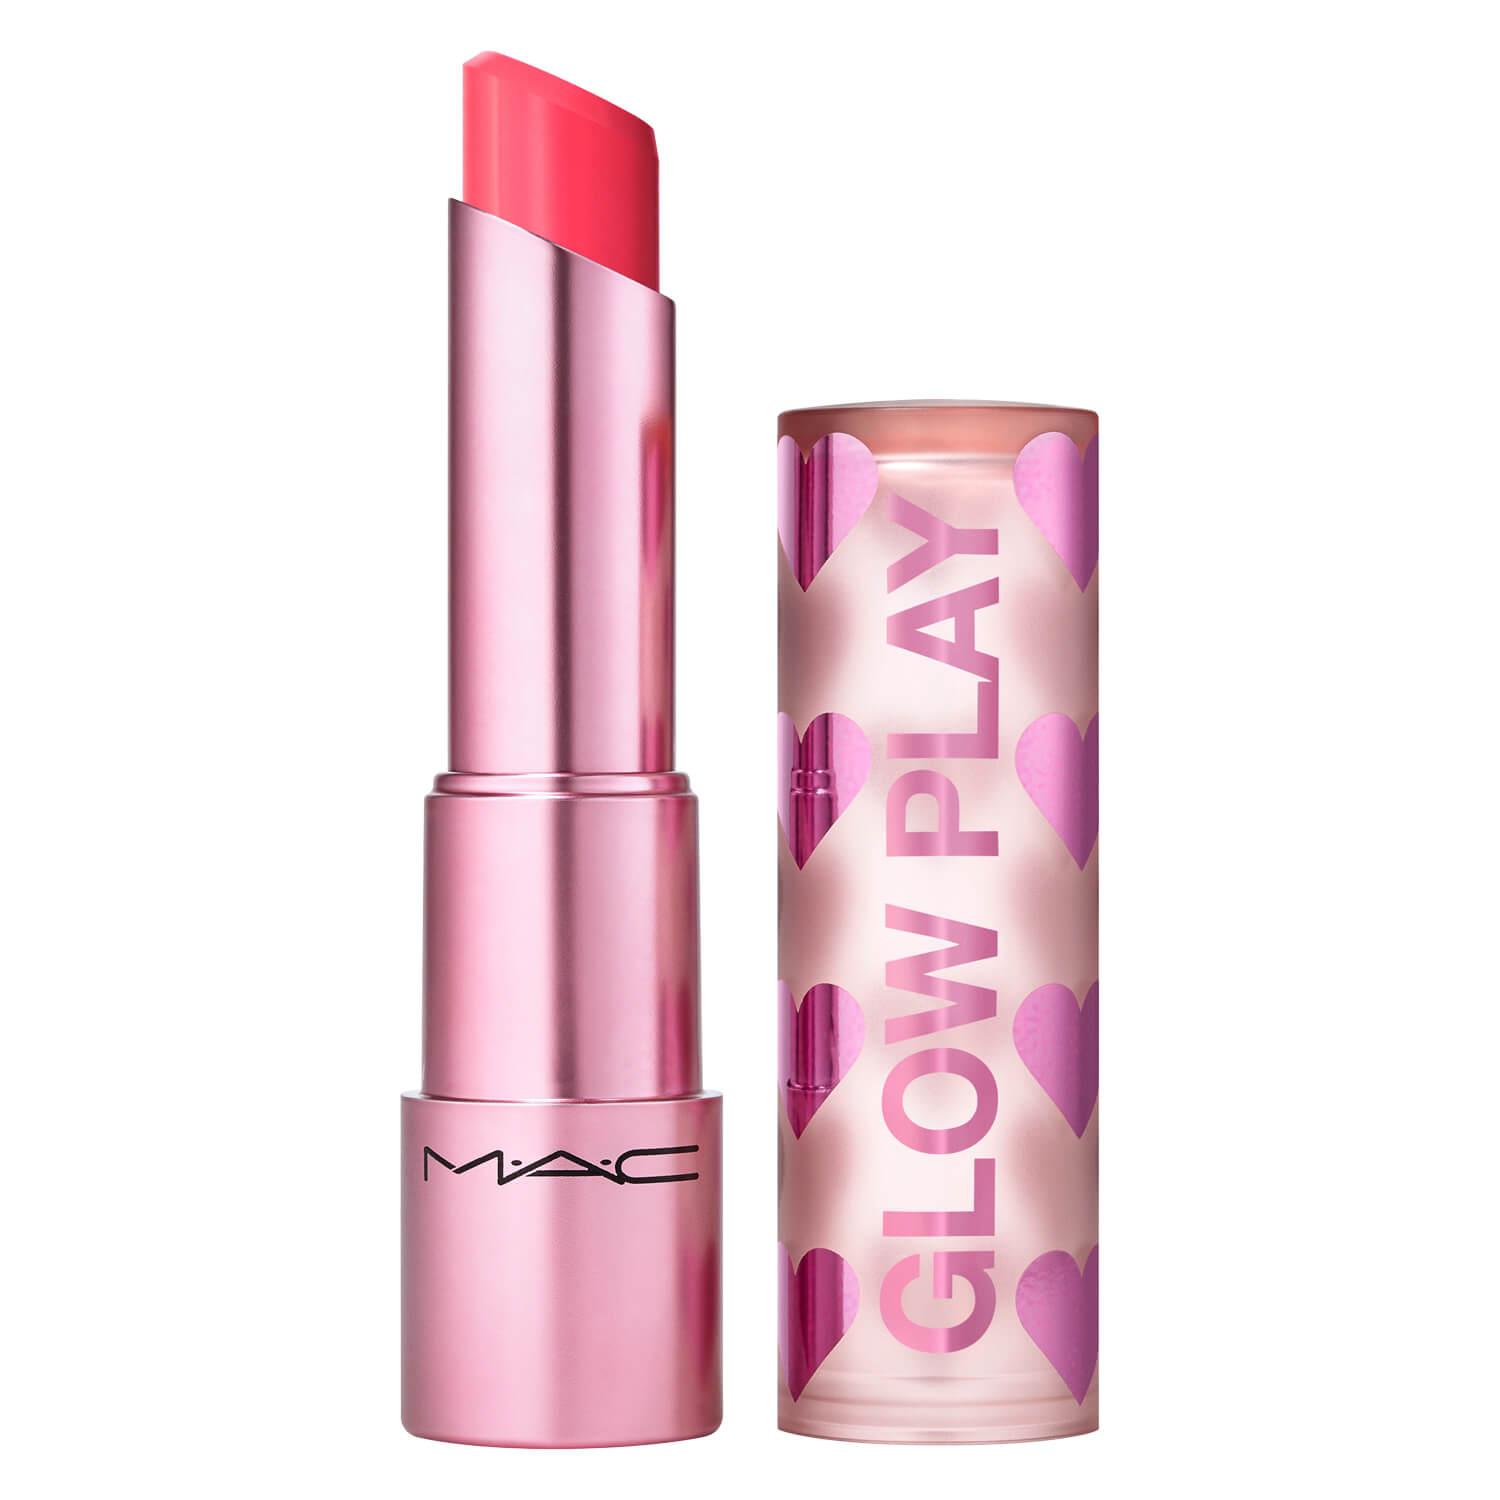 Glow Play Lip Balm - Floral Coral Love Edition